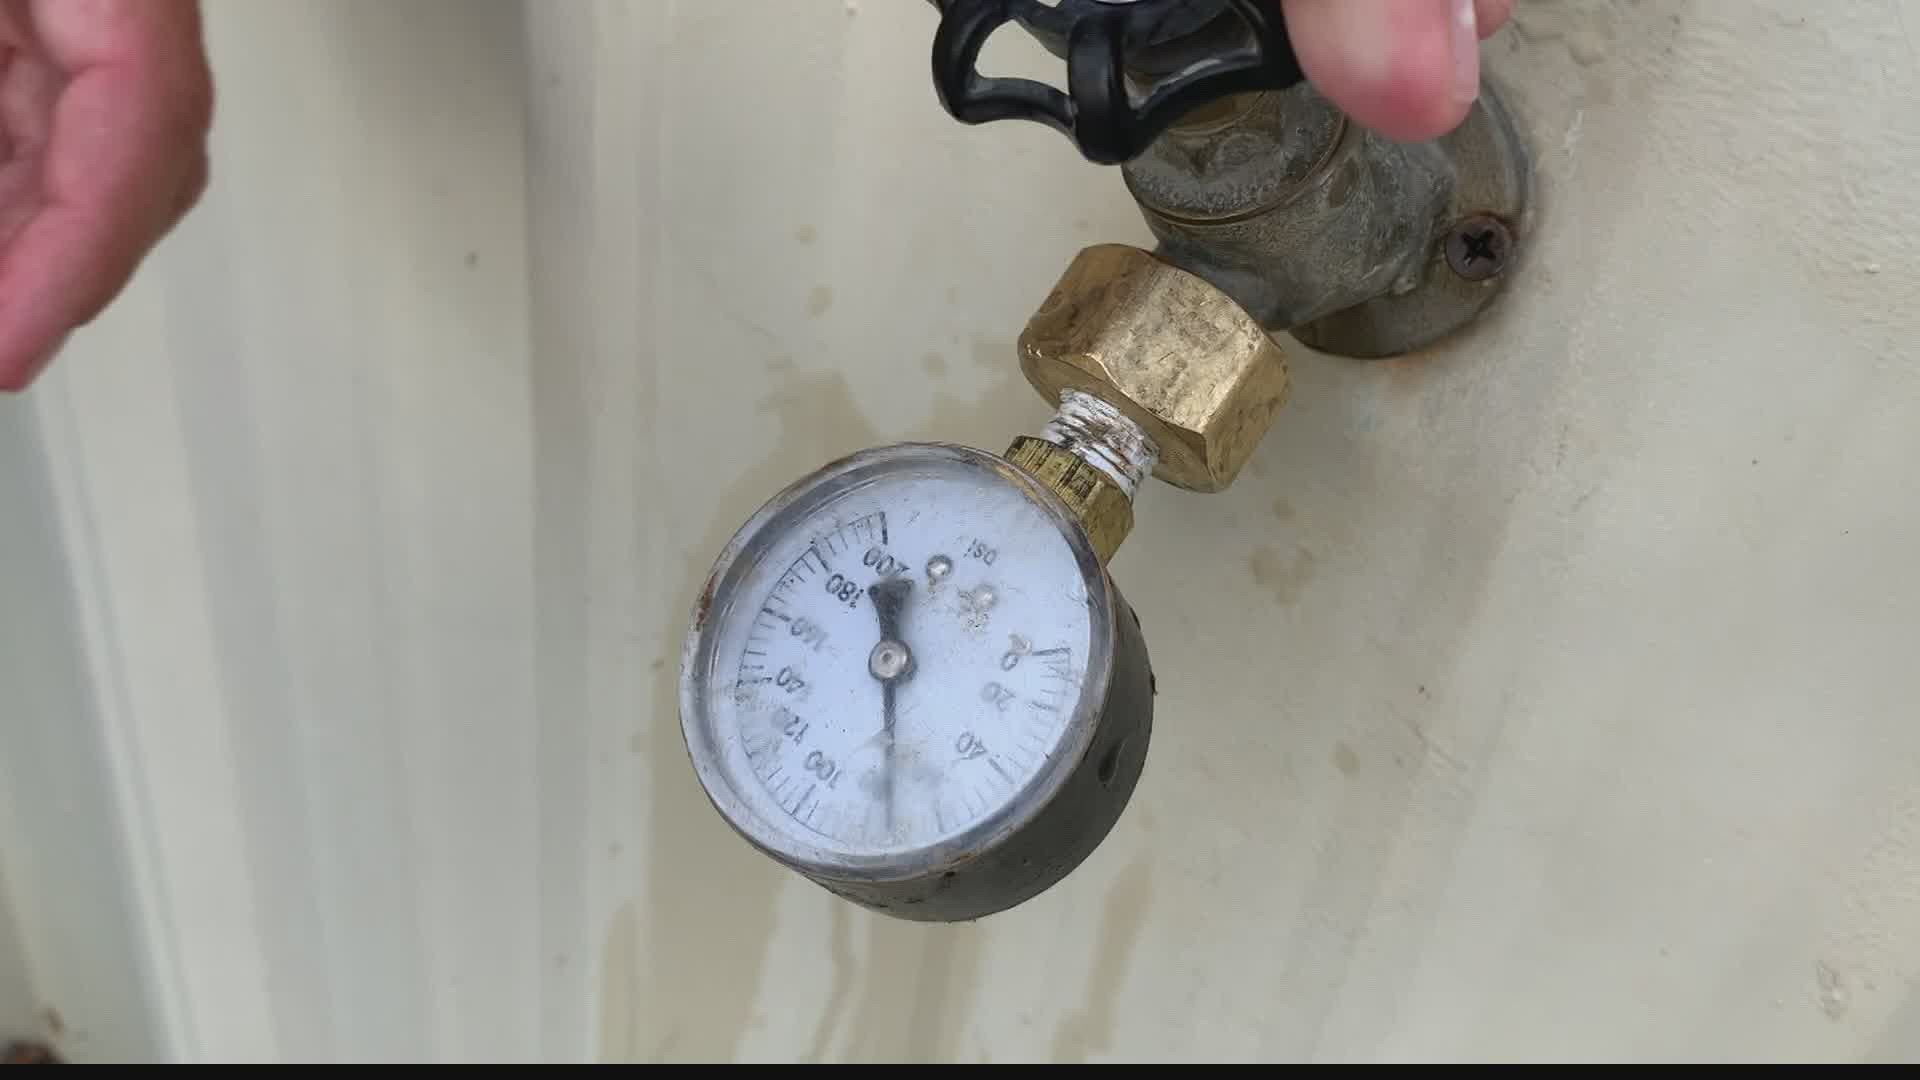 Unsuspecting homeowners are paying the price, but but 13 Investigates discovered there is no rule to limit the maximum water pressure.